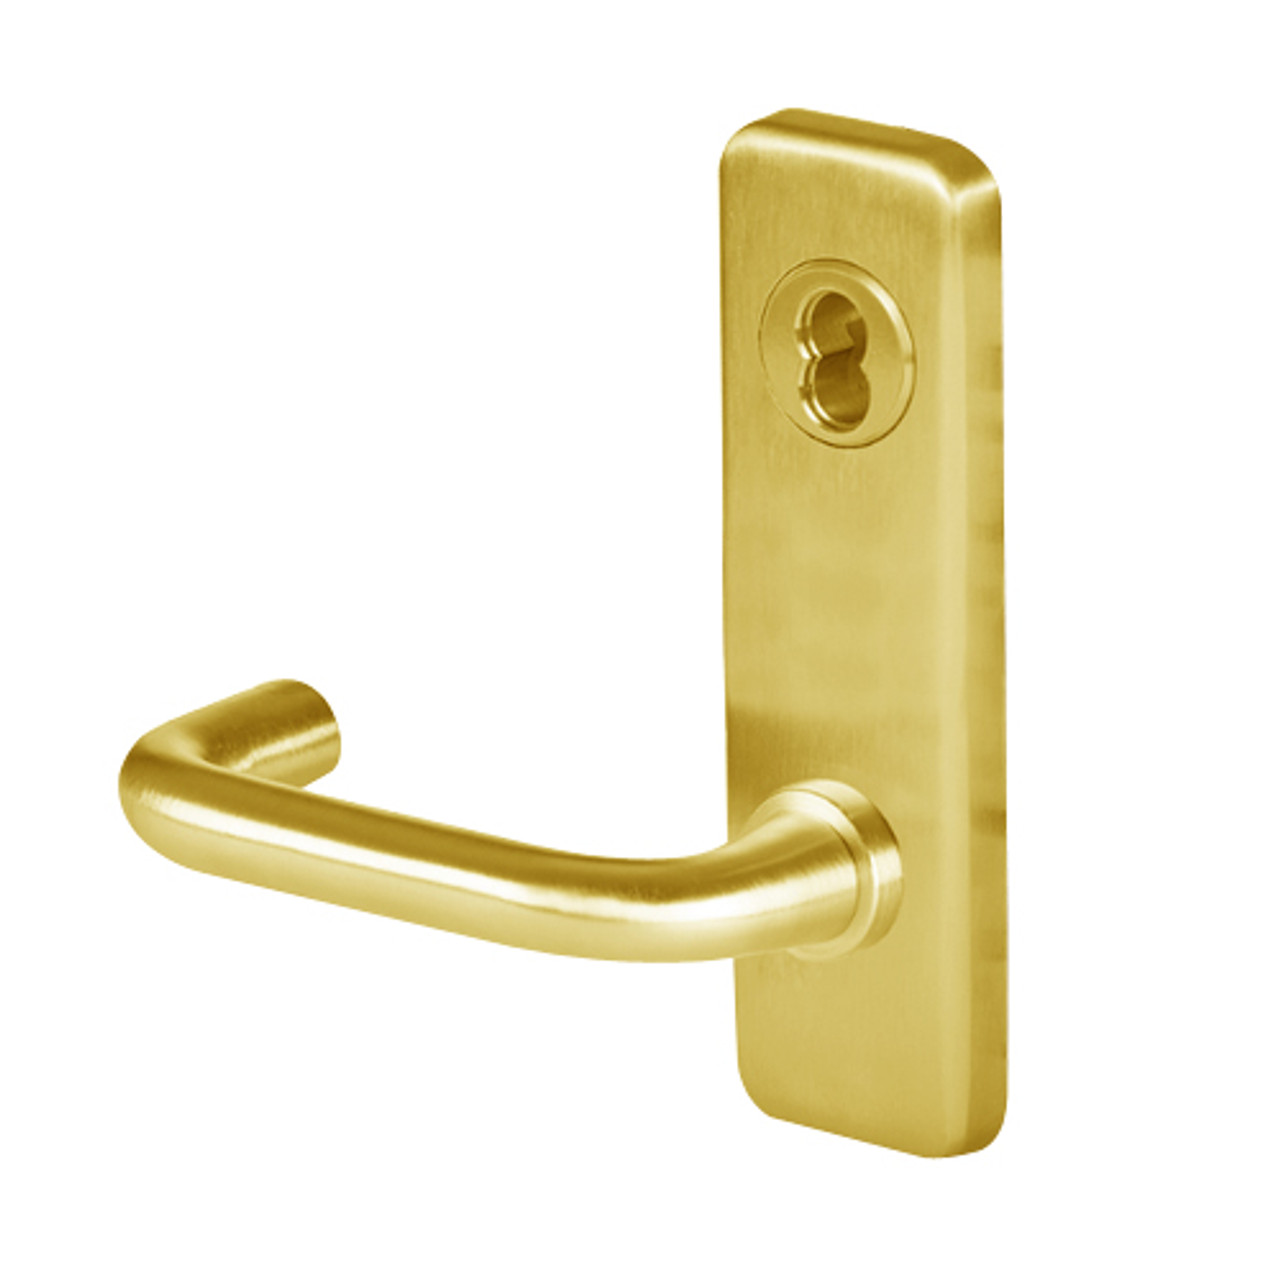 45H0NX3J605 Best 40H Series Exit Function Heavy Duty Mortise Lever Lock with Solid Tube Return Style in Bright Brass